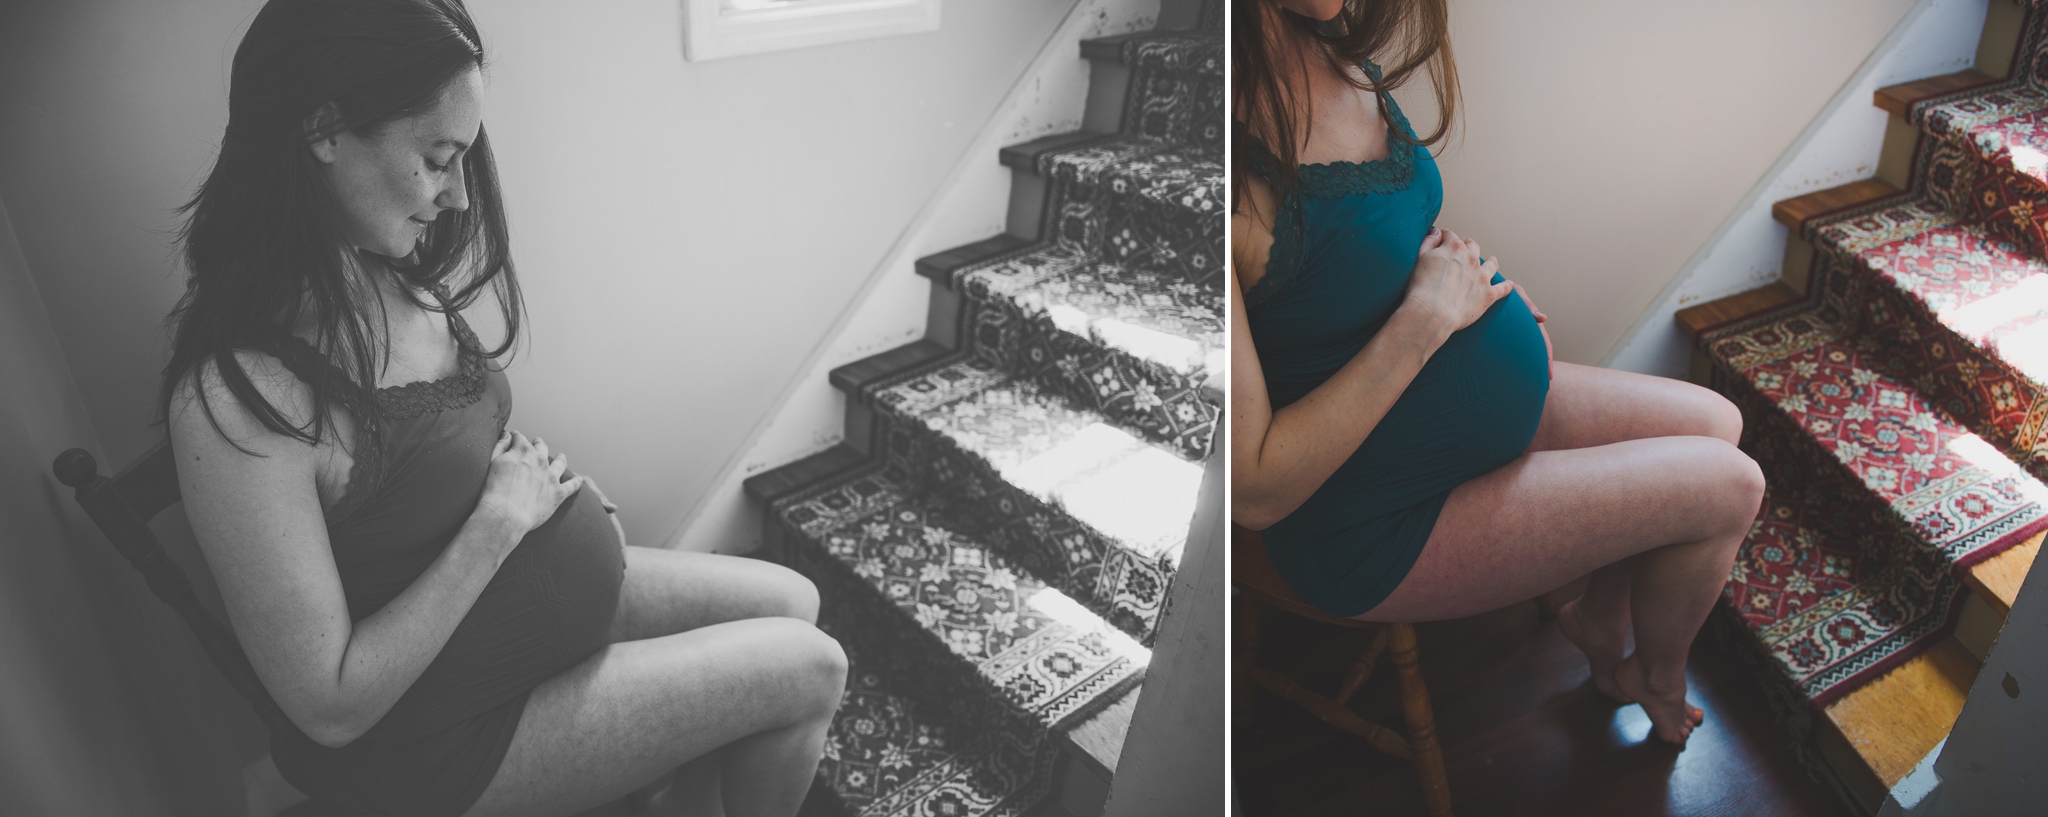 maternity, boudoir, photography, portraits, light, home, stairs